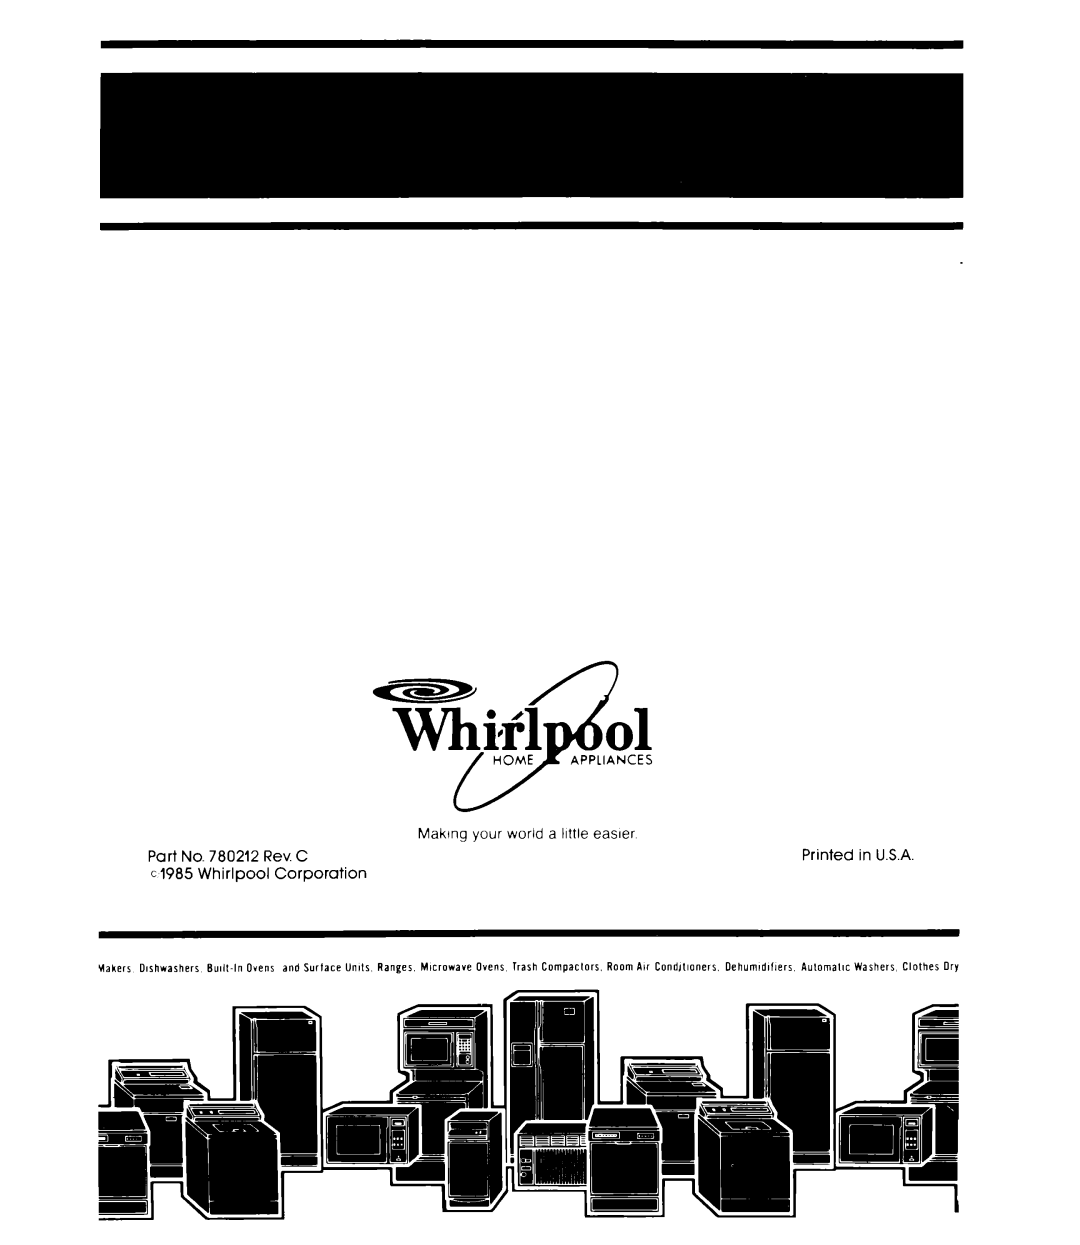 Whirlpool TU 4000 Series, TF 8500 Series manual Rev. C, Corporation, Maklng your world a httle easier, c 1985 Whirlpool 